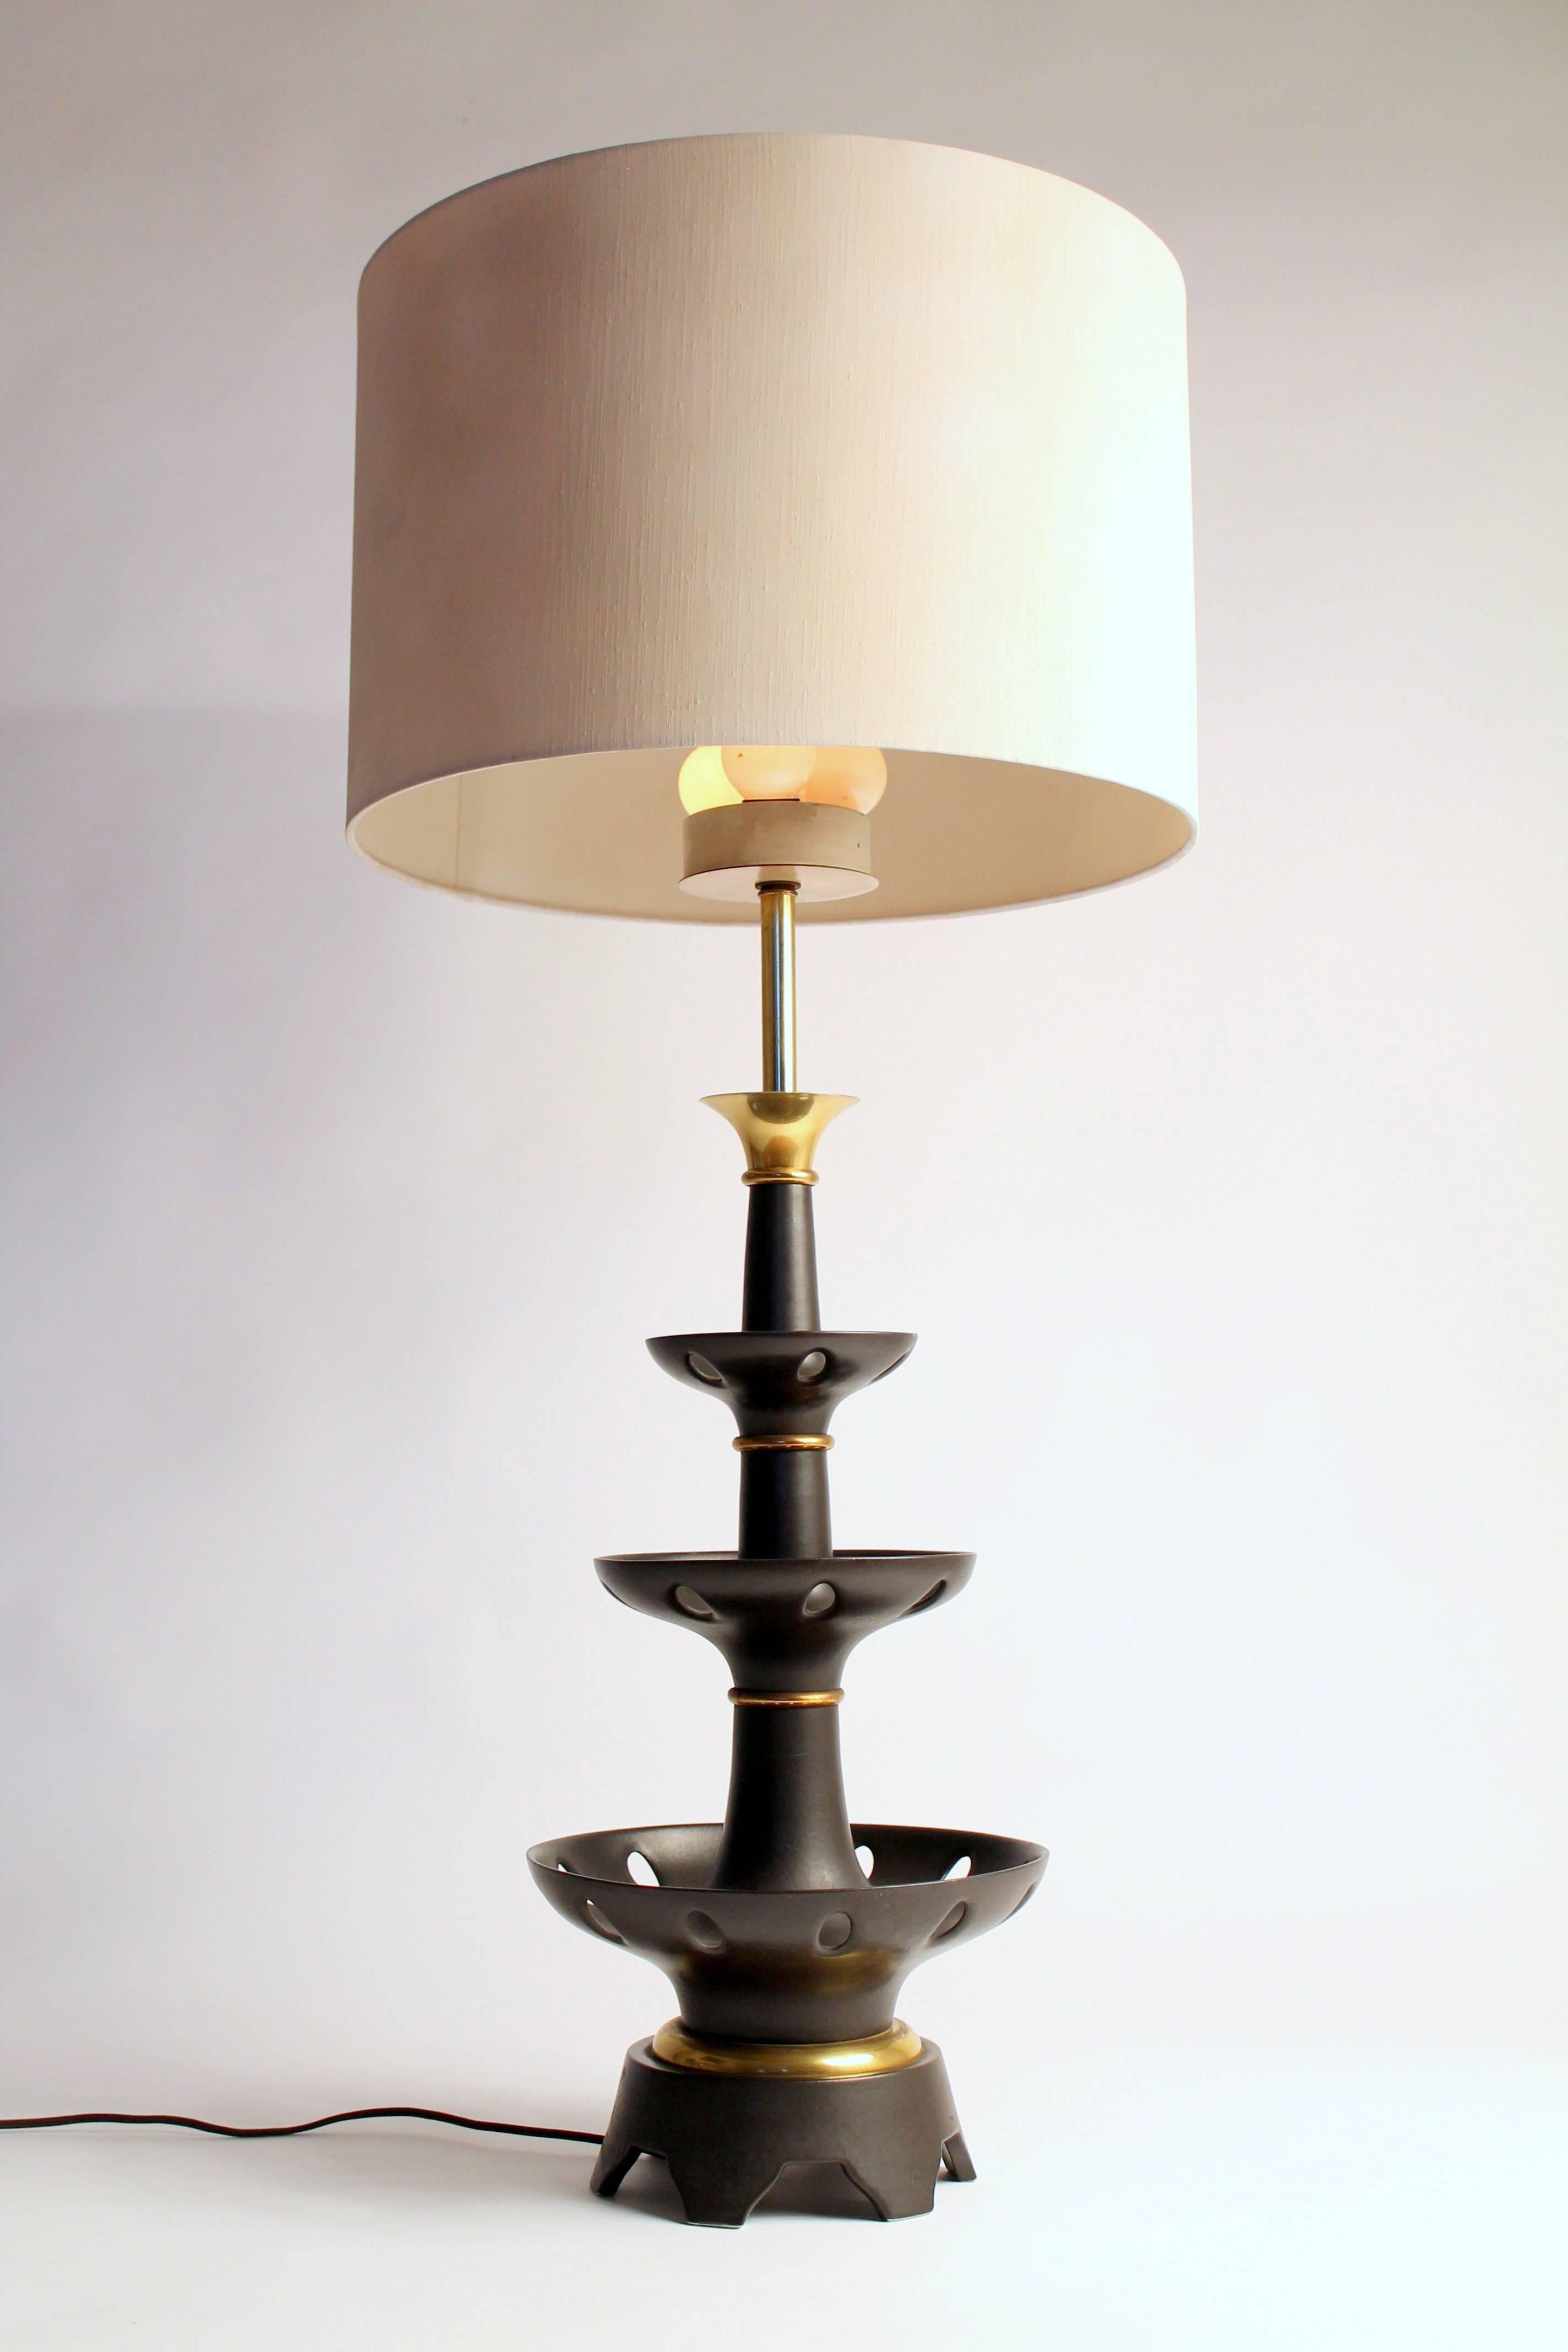 American G. Thurston Porcelain Three-Tiered Table Lamp, Lightolier, 1950s, USA For Sale